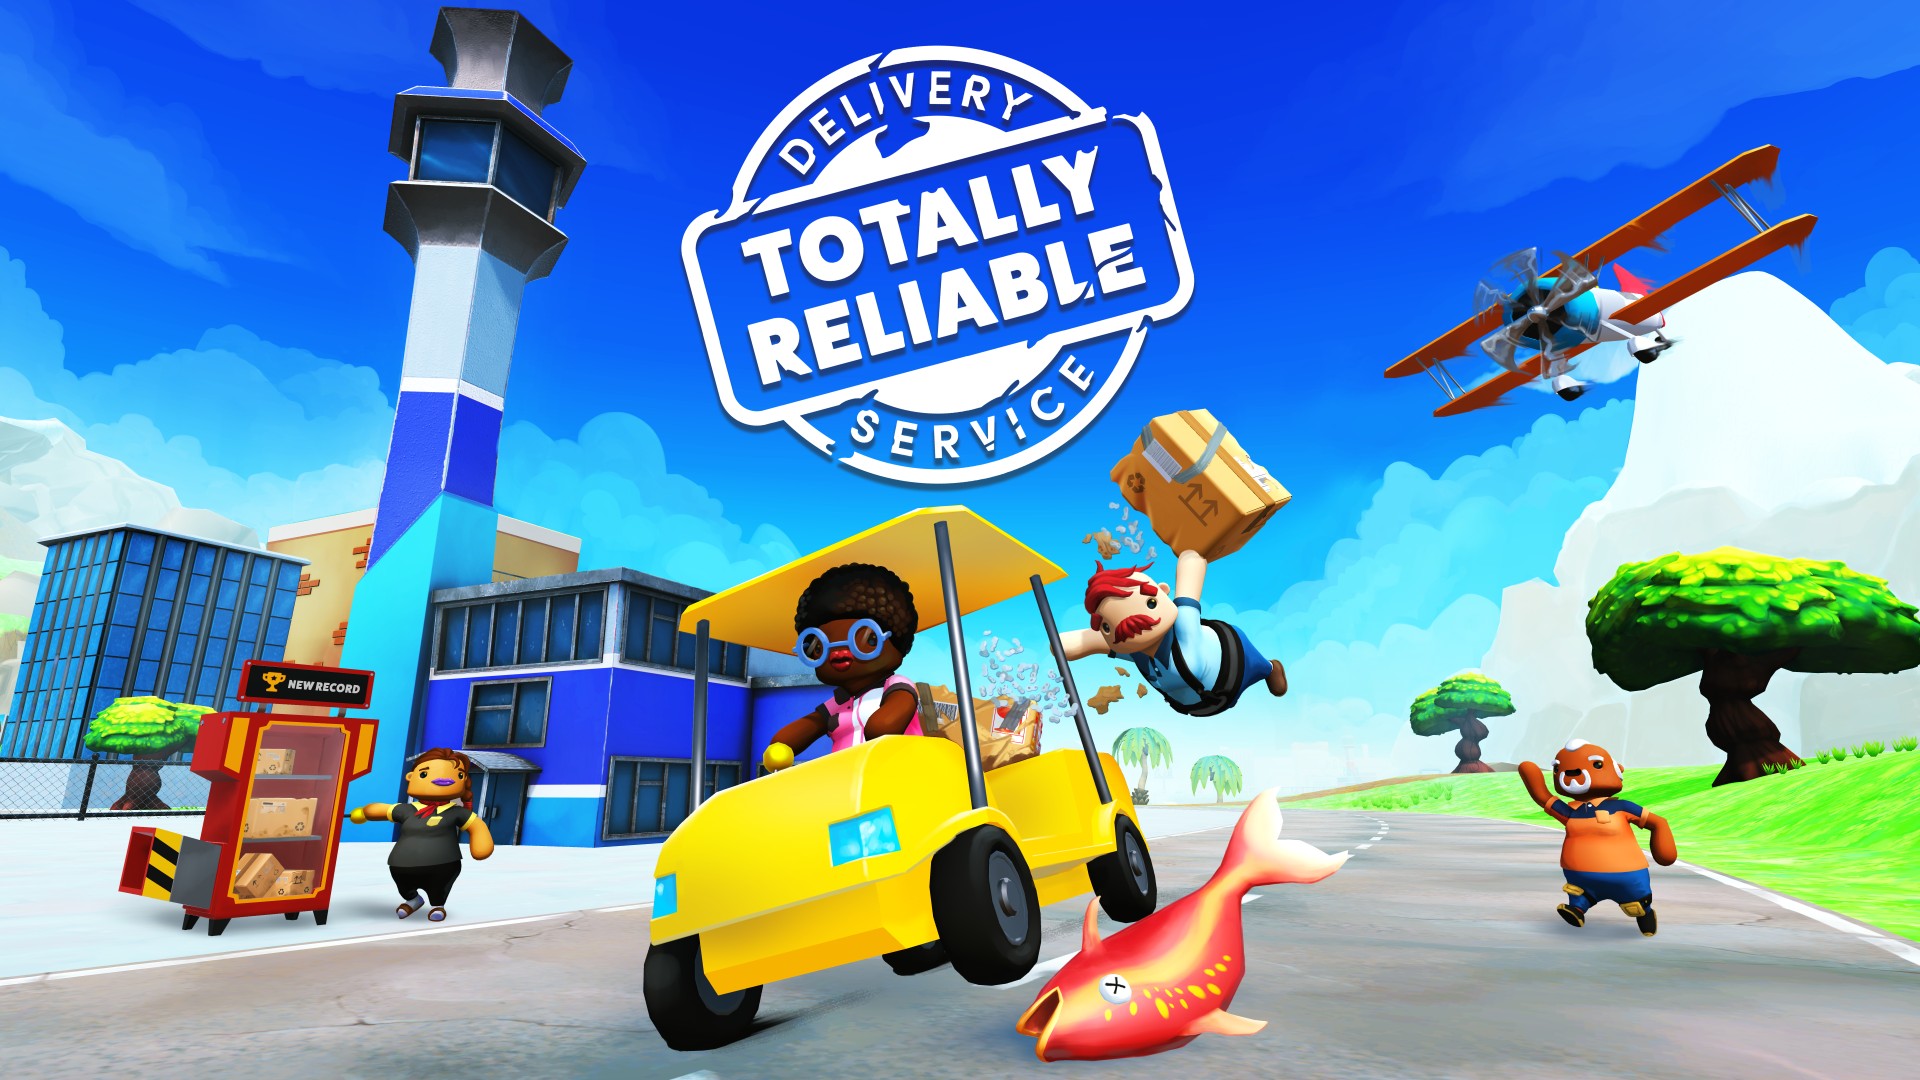 Video For Totally Reliable Delivery Service Arrives Today with Xbox Game Pass